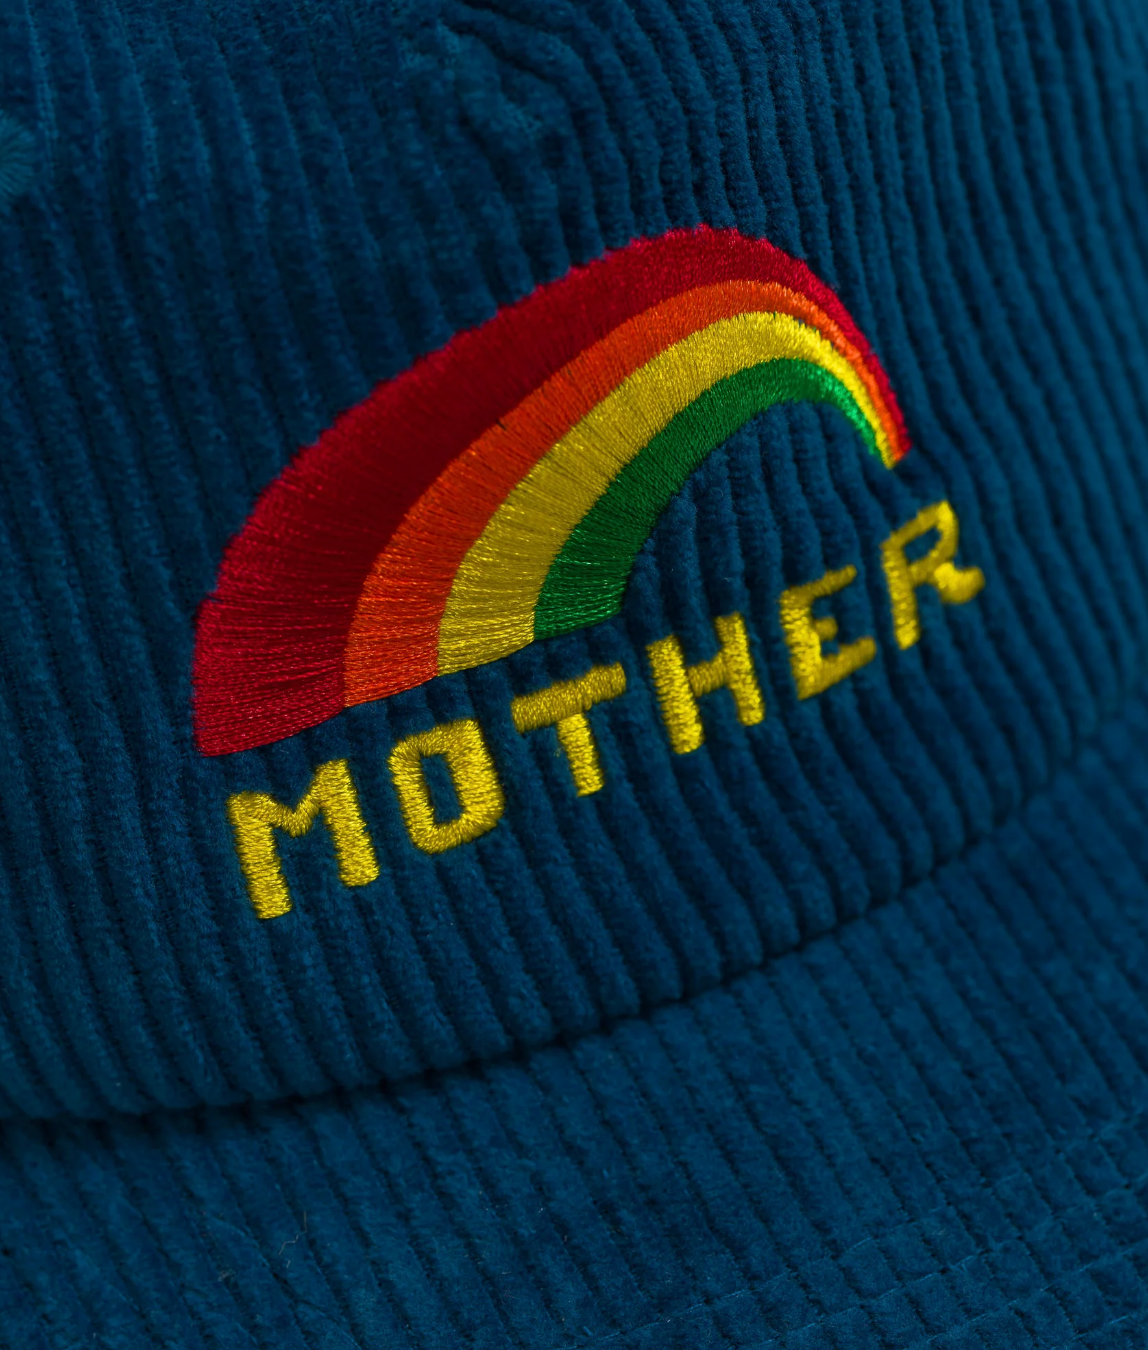 Mother 10-4 Hat